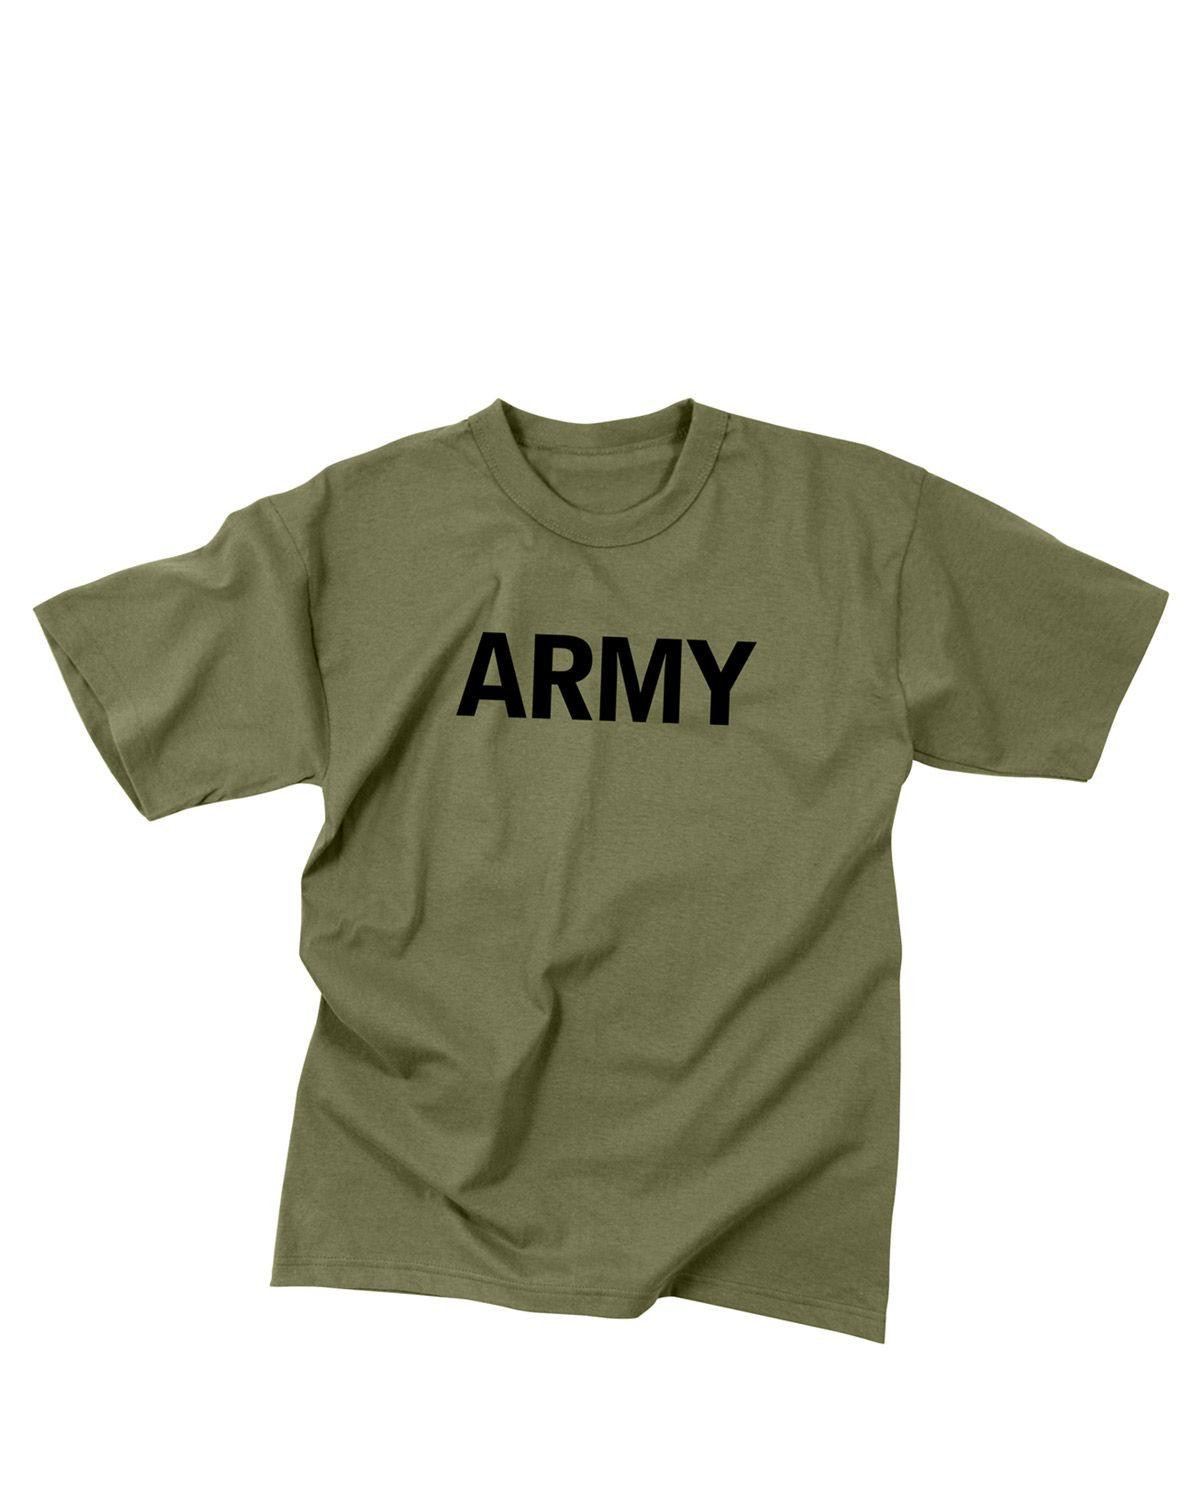 Rothco Physical Training T-shirt (Oliven m. ARMY, M)